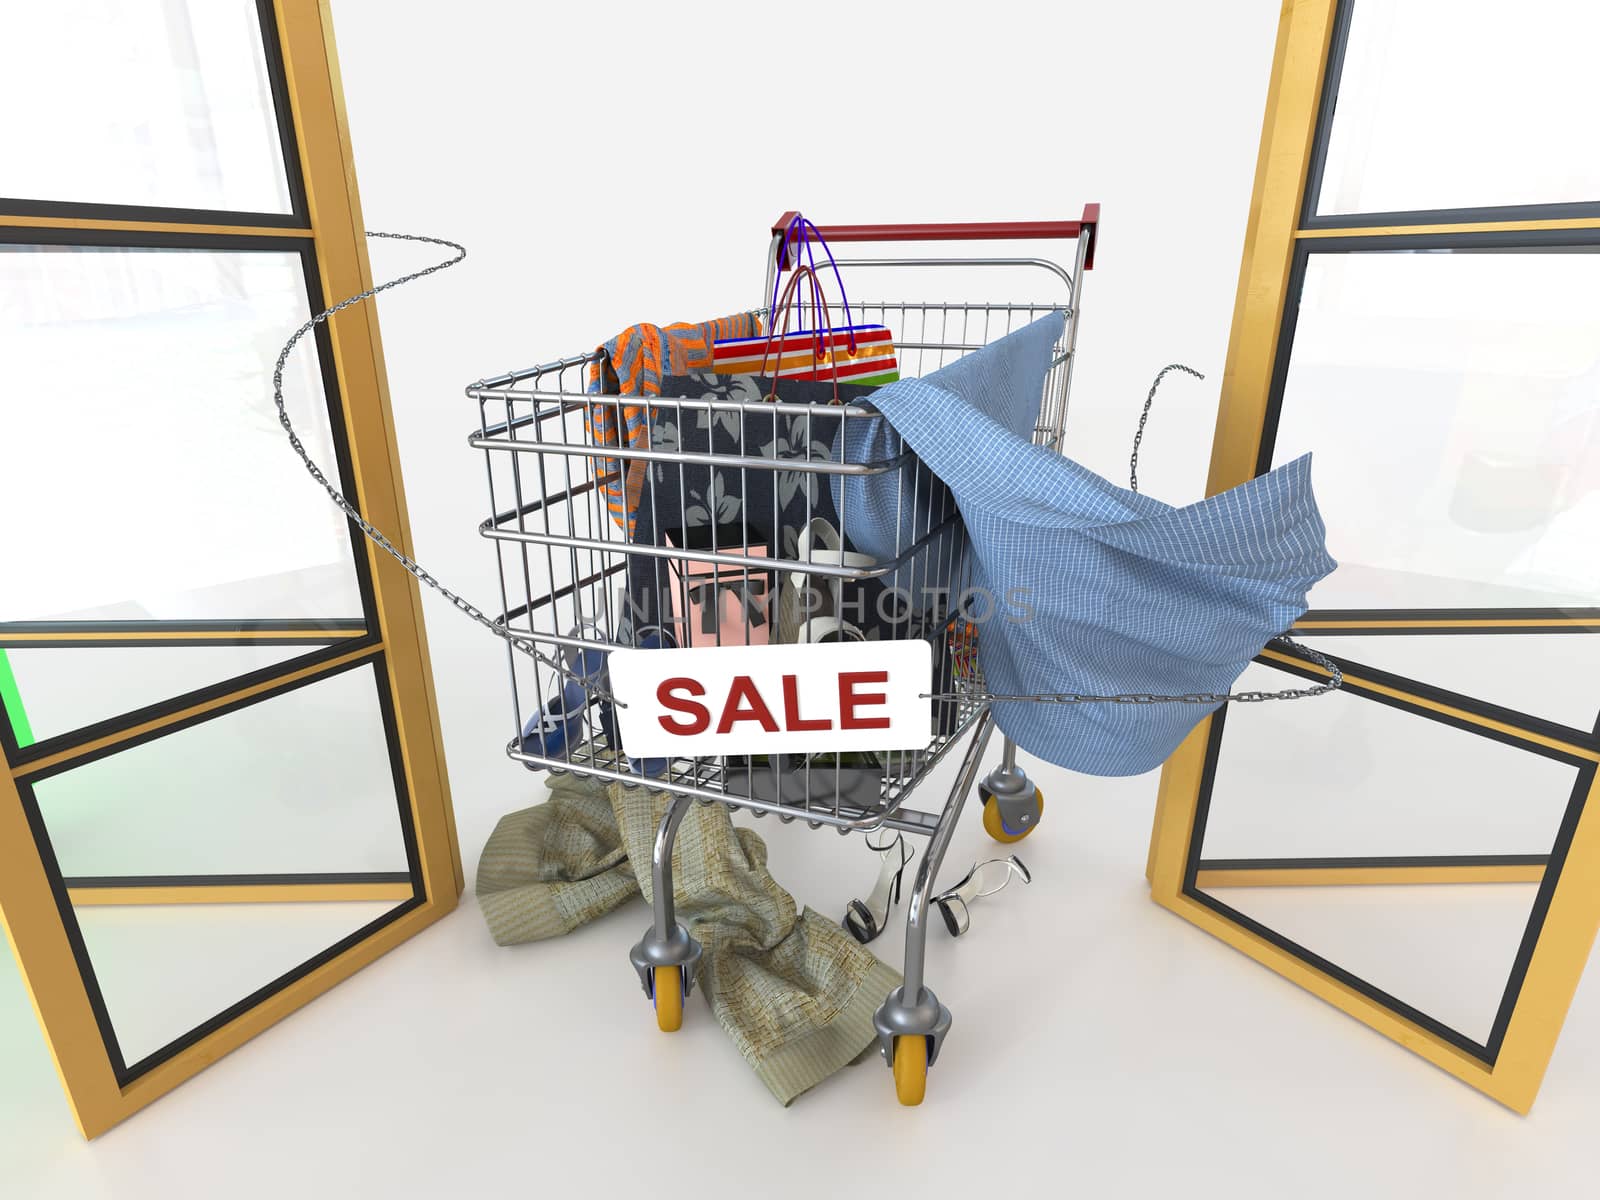 shopping sale concept background with shopping trolley on isolate white by denisgo